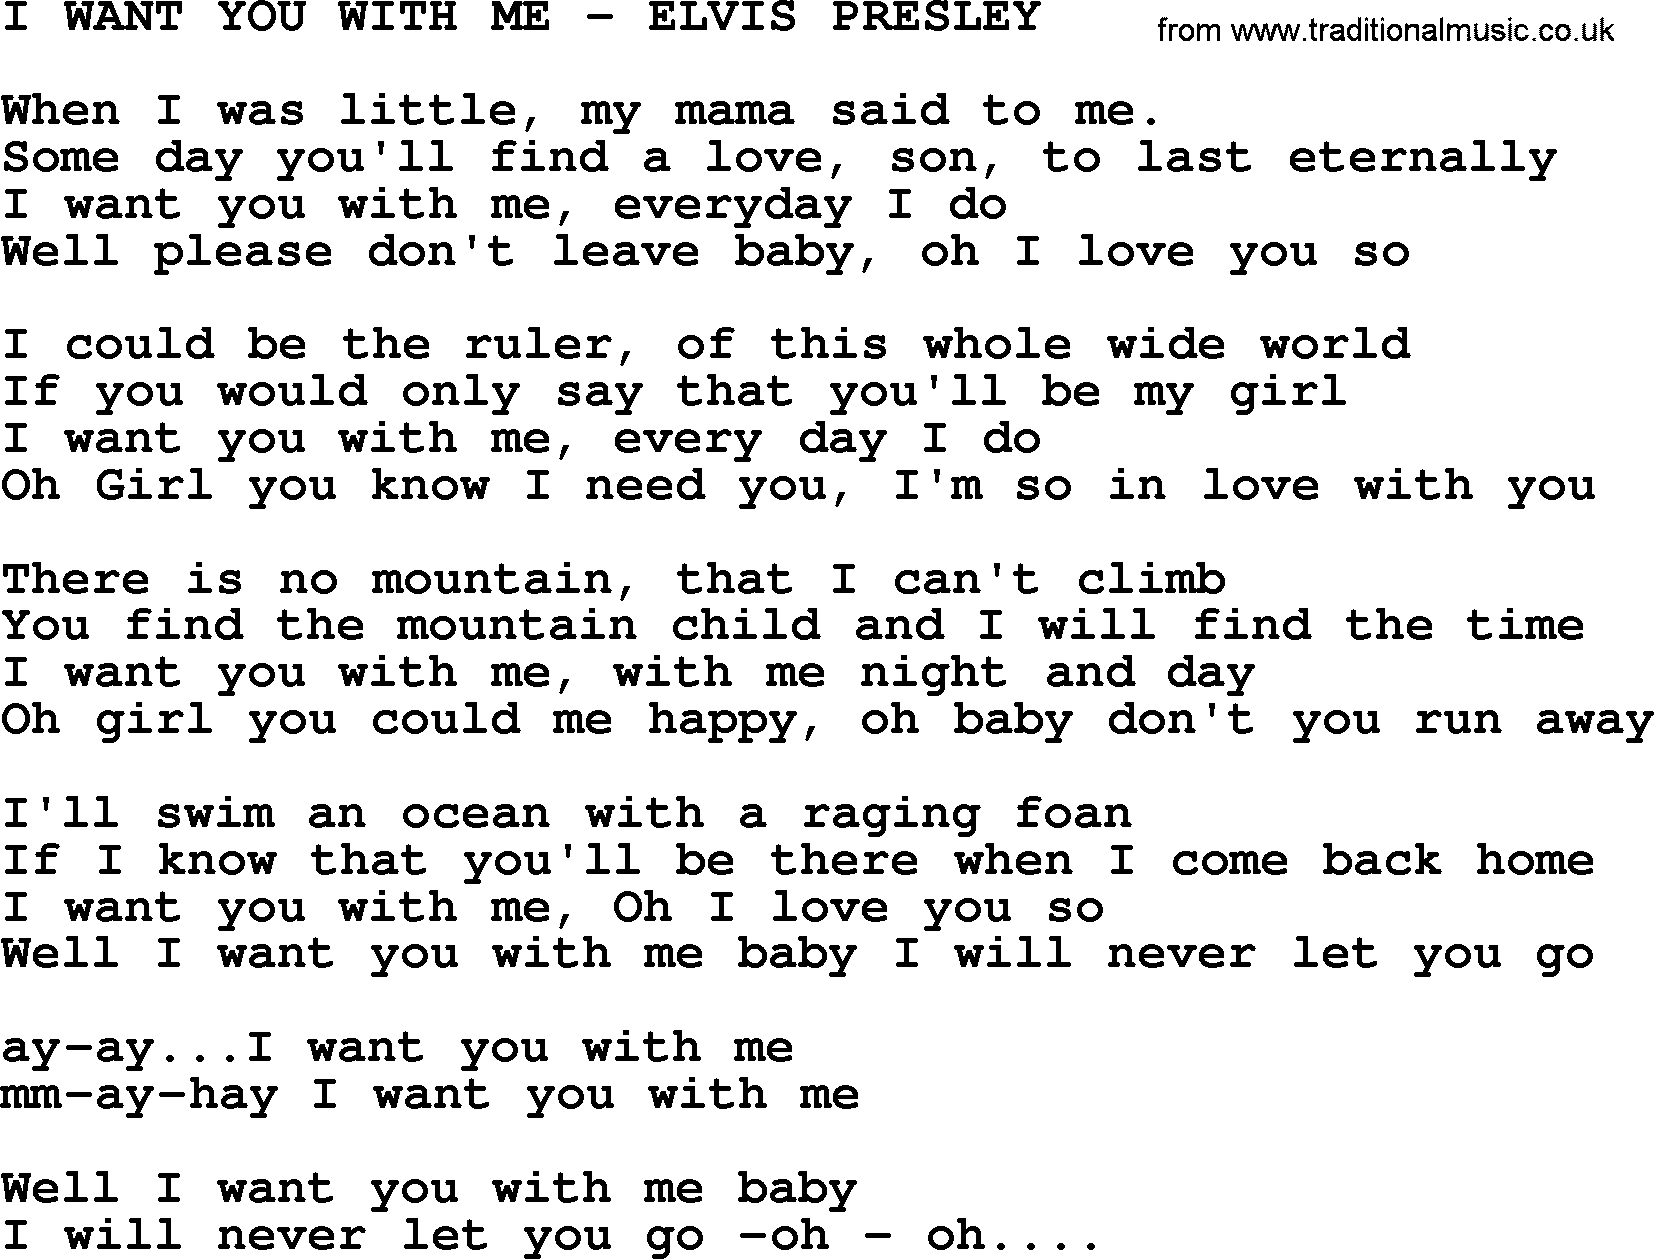 Elvis Presley song: I Want You With Me-Elvis Presley-.txt lyrics and chords